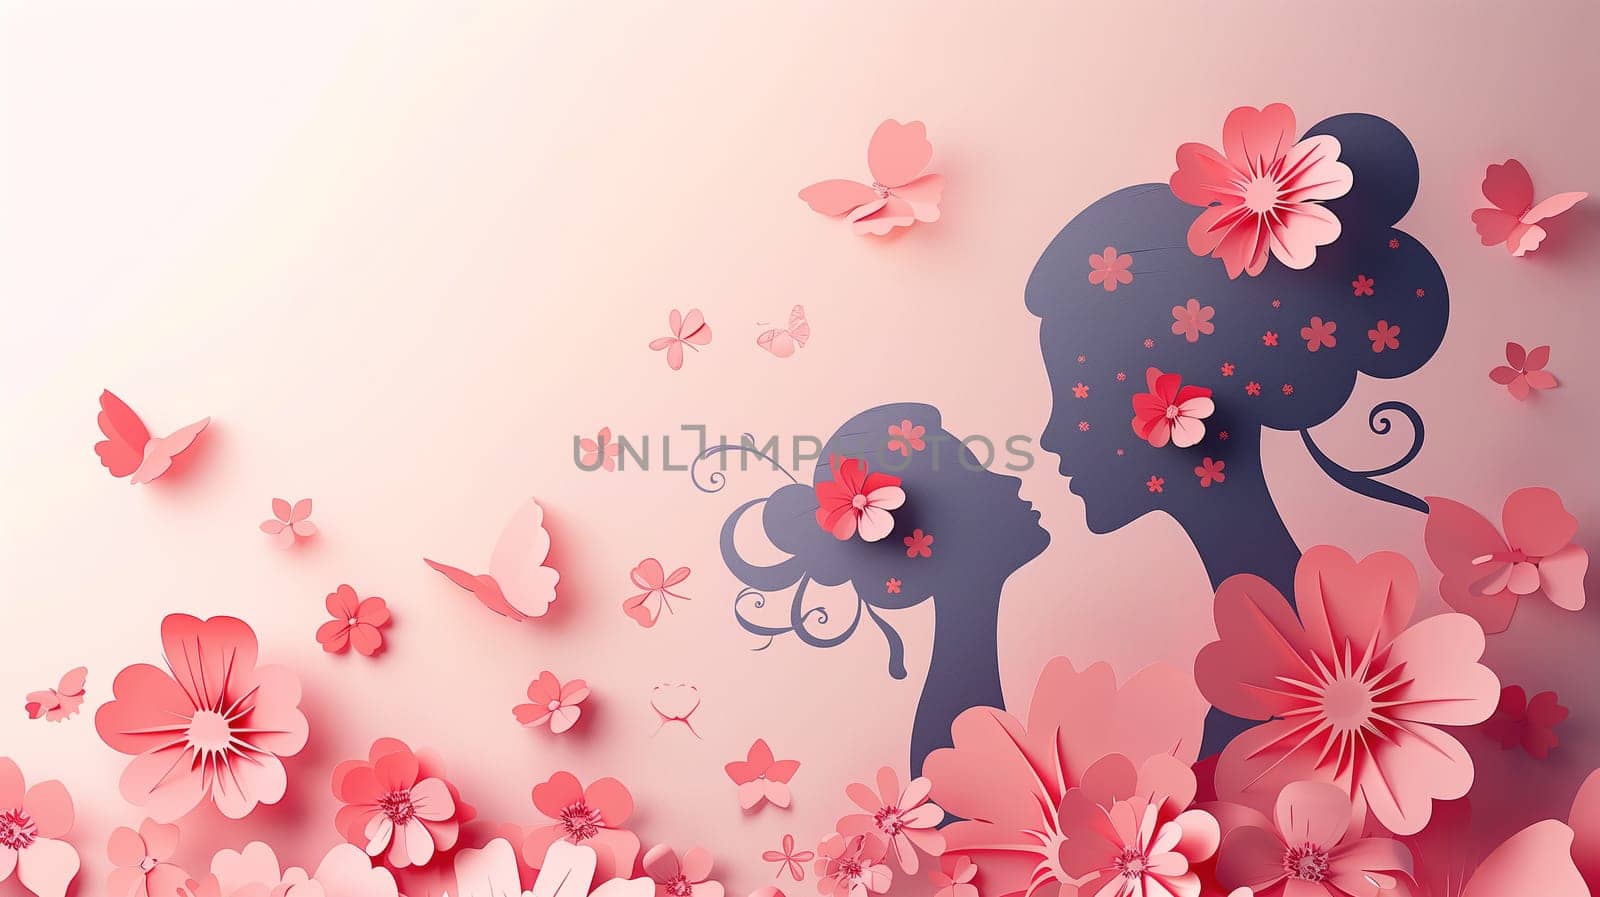 Womans Profile Surrounded by Pink Flowers and Butterflies by TRMK